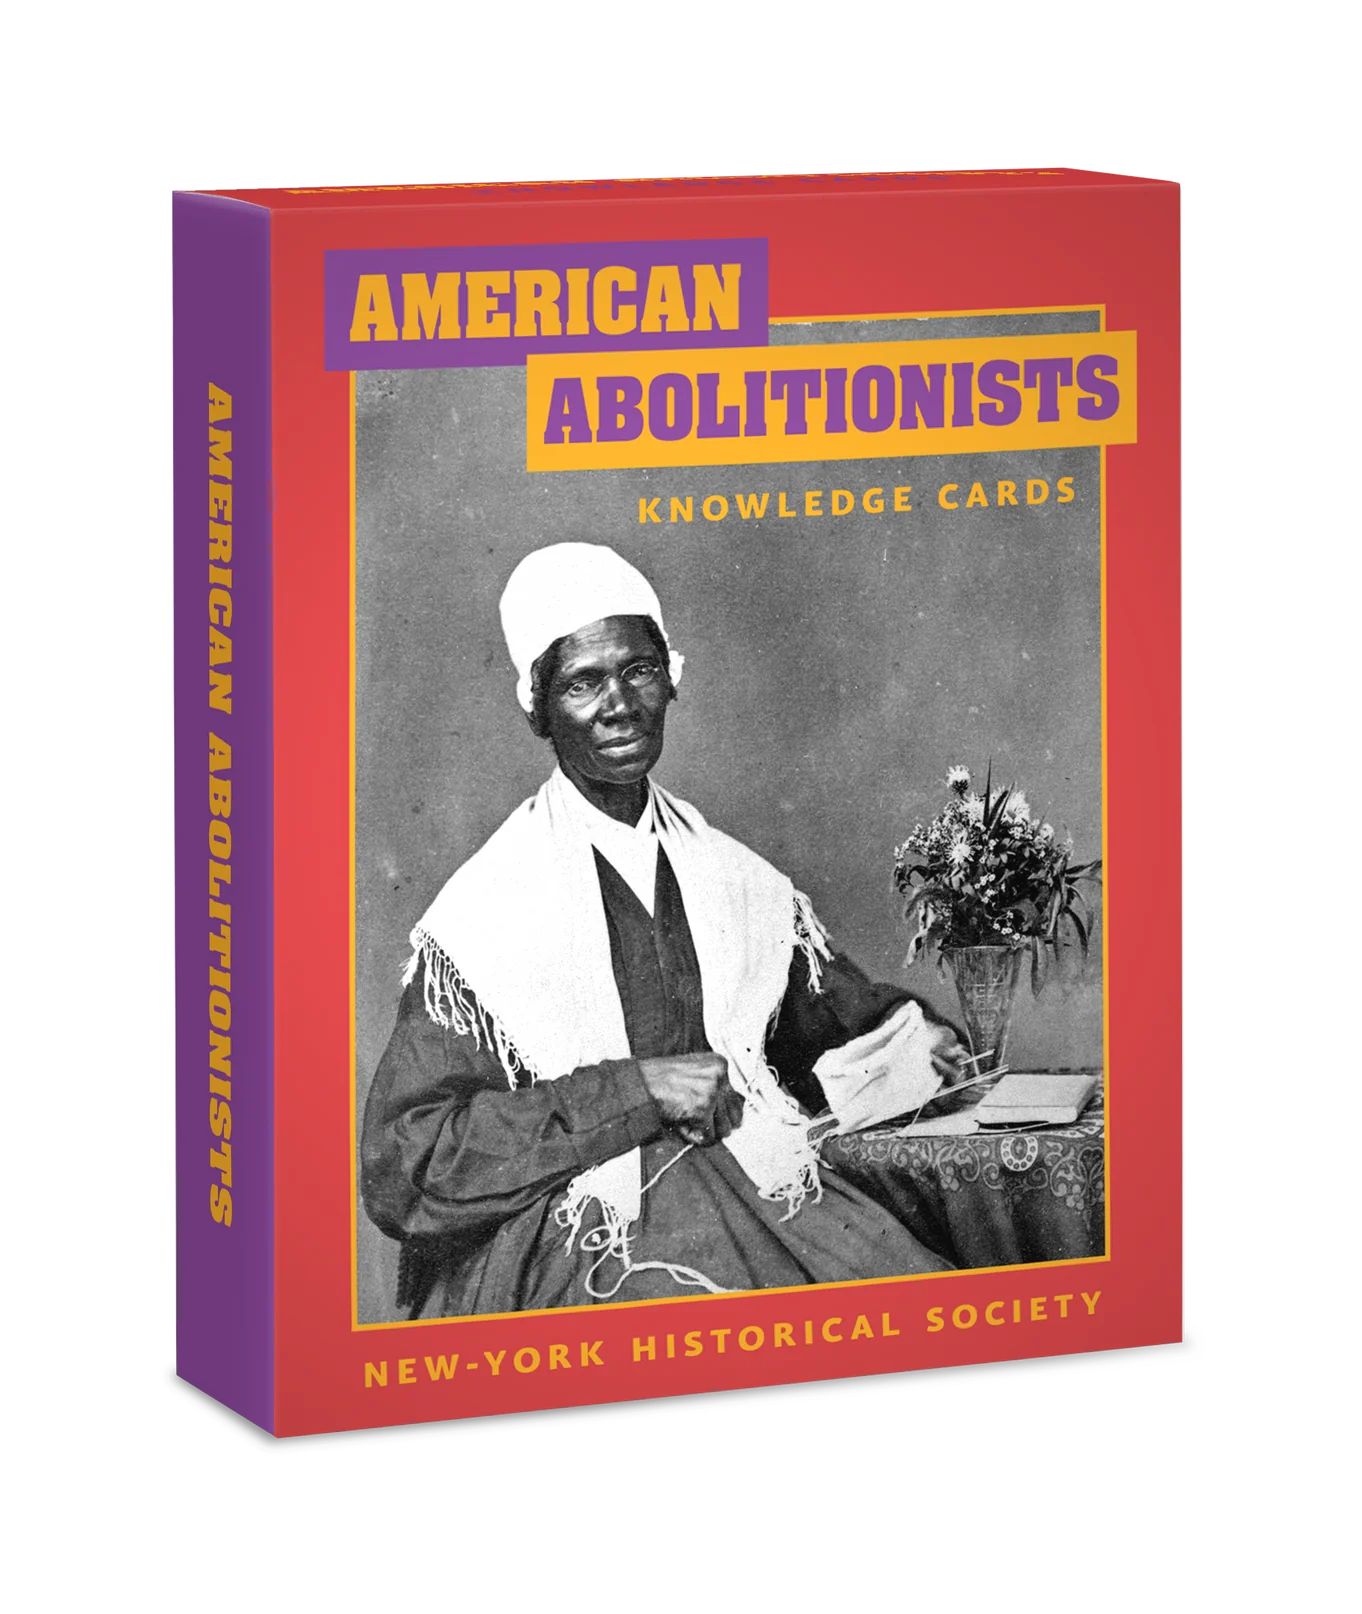 American Abolitionist Knowledge Cards